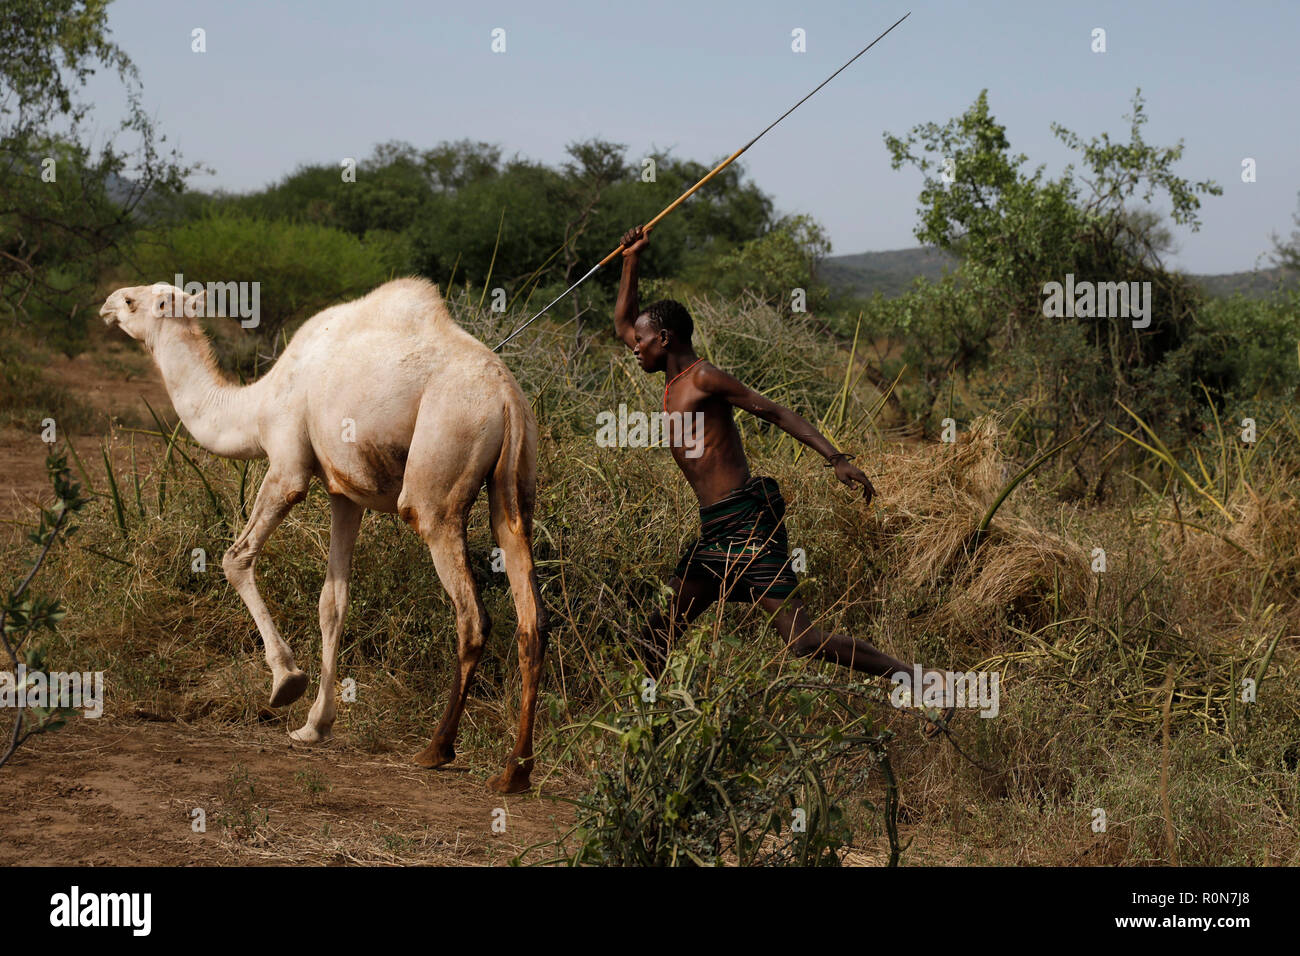 A man spears a camel during a ceremony into adulthood in a Pokot community of herdsmen in Baringo County, Kenya, October 2, 2018. Stock Photo